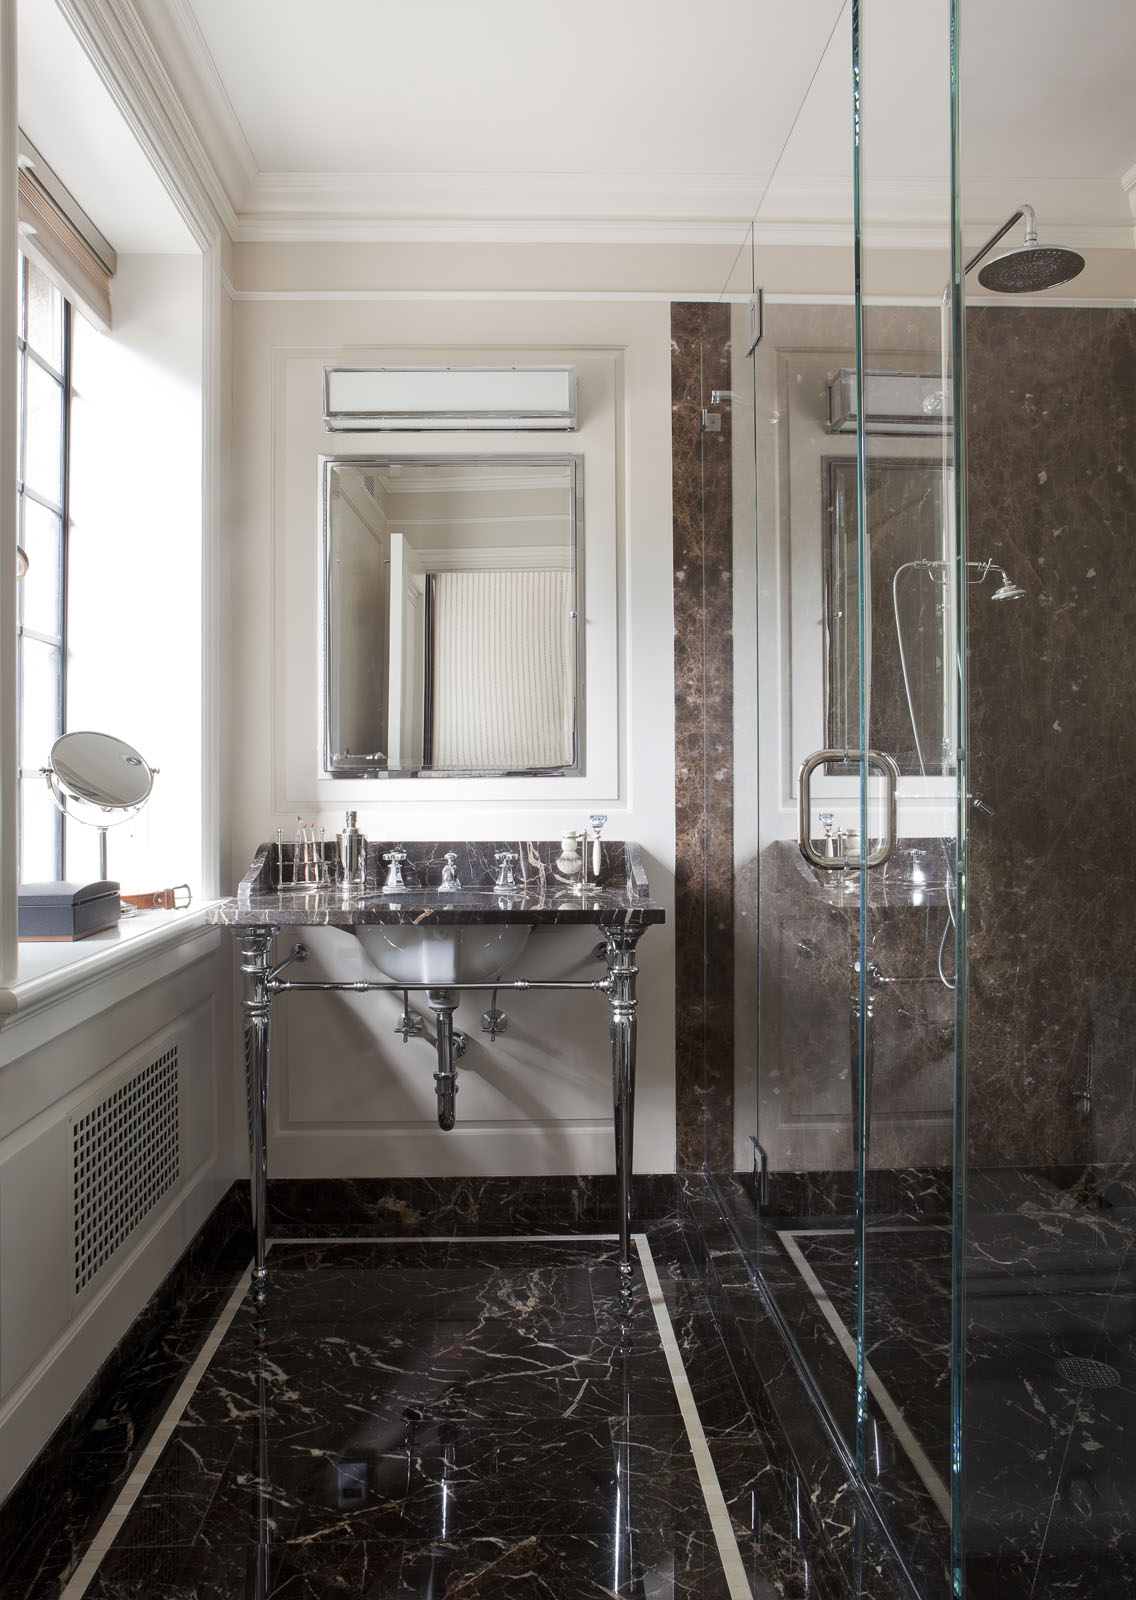  The husband’s sleek bath features a wall light by&nbsp;  Circa Lighting  , an&nbsp;  Urban Archaeology  &nbsp;vanity, and a mirror and shower fittings by&nbsp;  Lefroy Brooks  . 